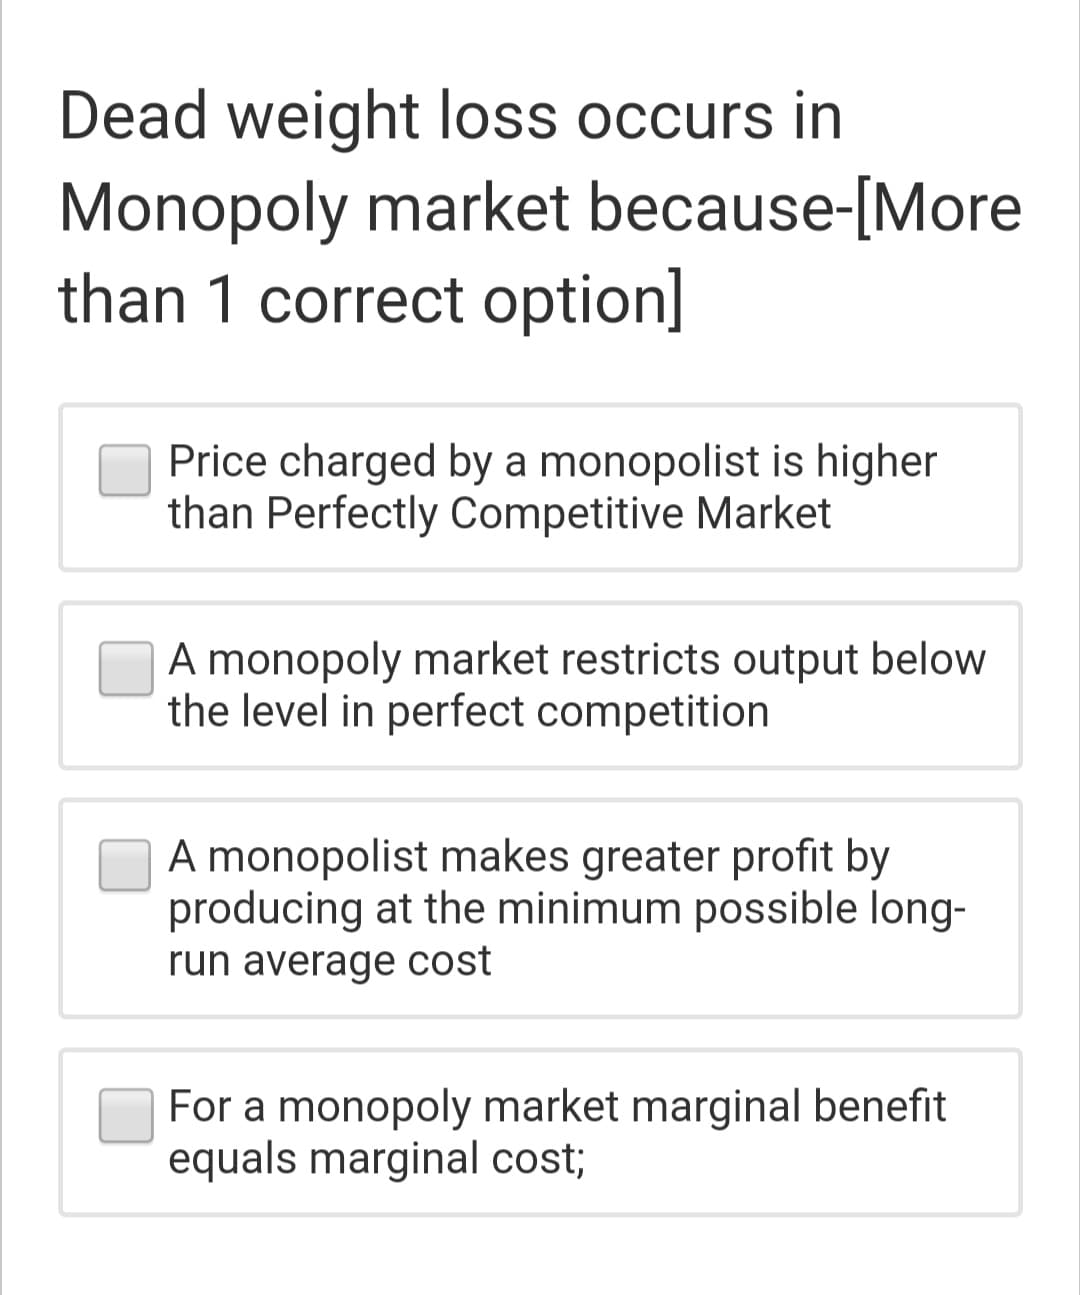 Dead weight loss occurs in
Monopoly market because-[More
than 1 correct option]
Price charged by a monopolist is higher
than Perfectly Competitive Market
A monopoly market restricts output below
the level in perfect competition
A monopolist makes greater profit by
producing at the minimum possible long-
run average cost
For a monopoly market marginal benefit
equals marginal cost;
